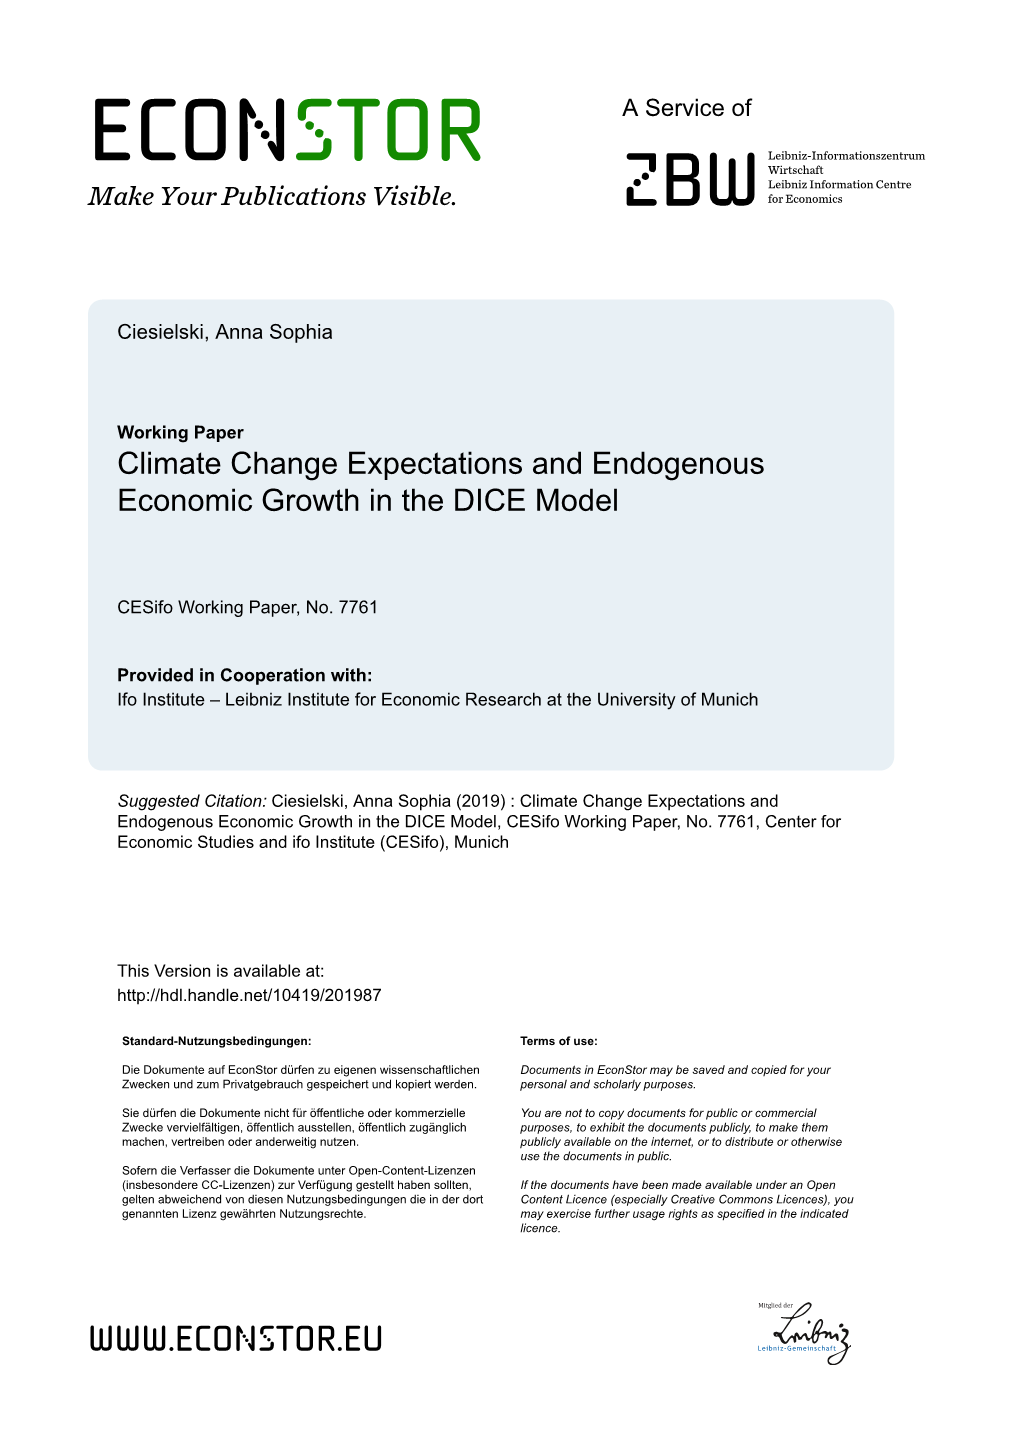 Climate Change Expectations and Endogenous Economic Growth in the DICE Model